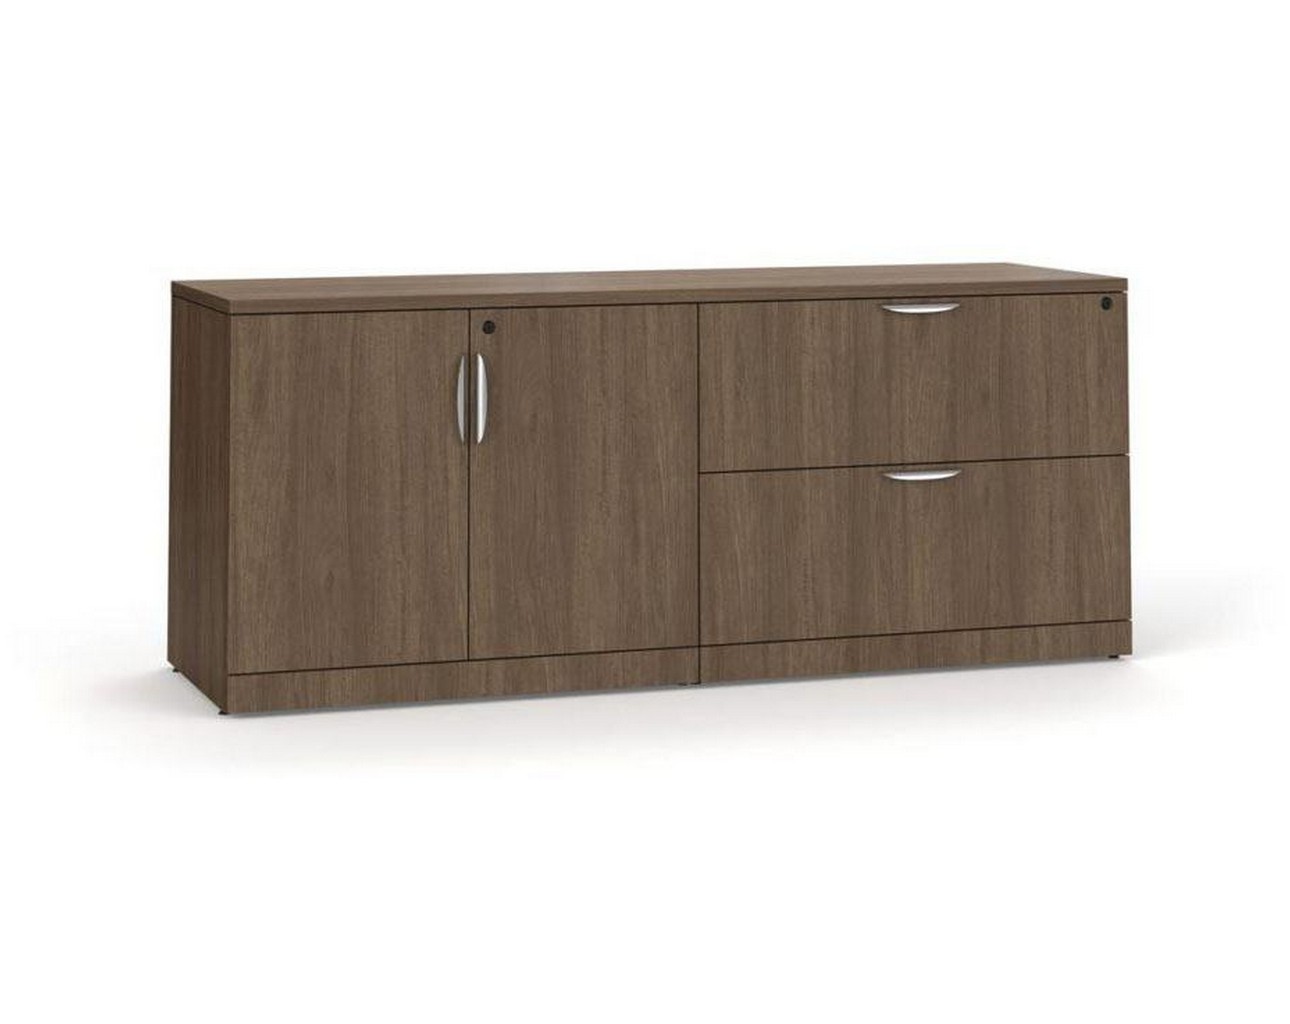 Lateral Storage Credenza – Modern Walnut Base and Top